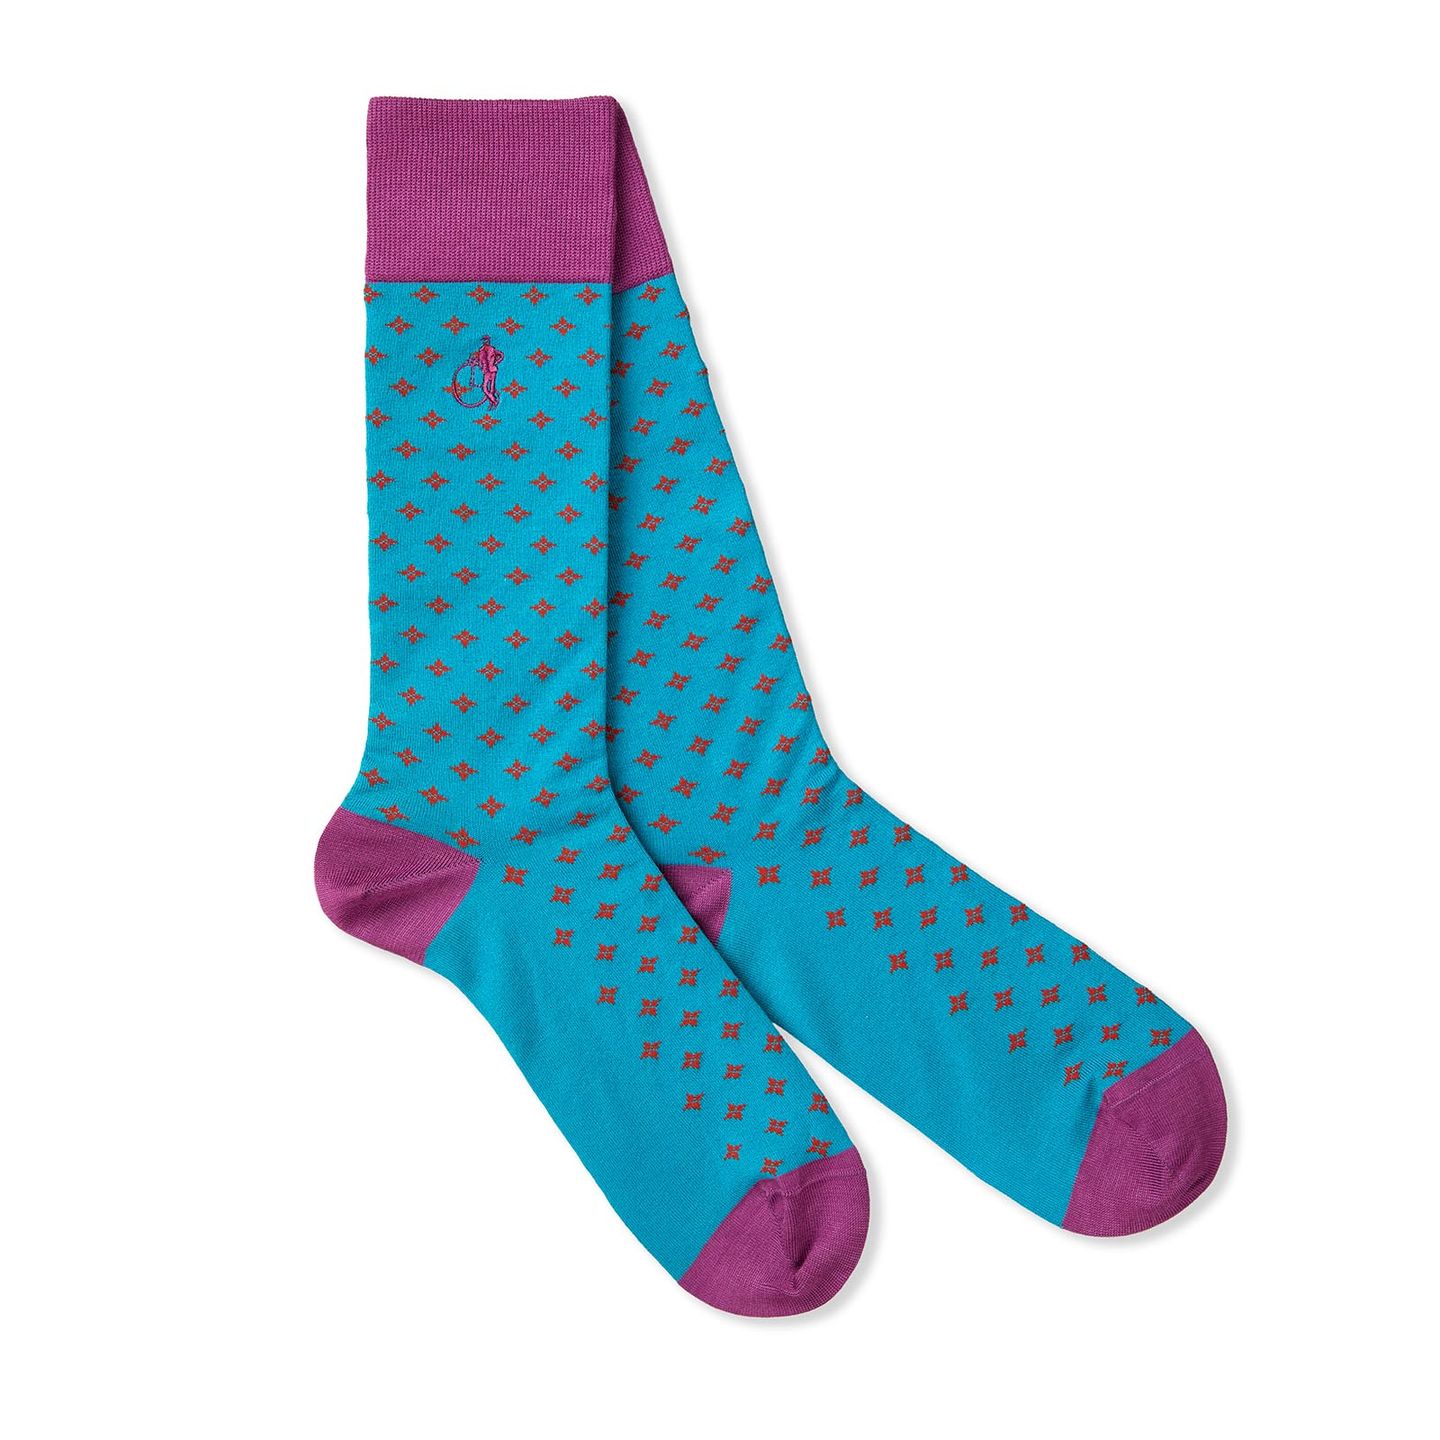 A pair of blue and pink patterned socks